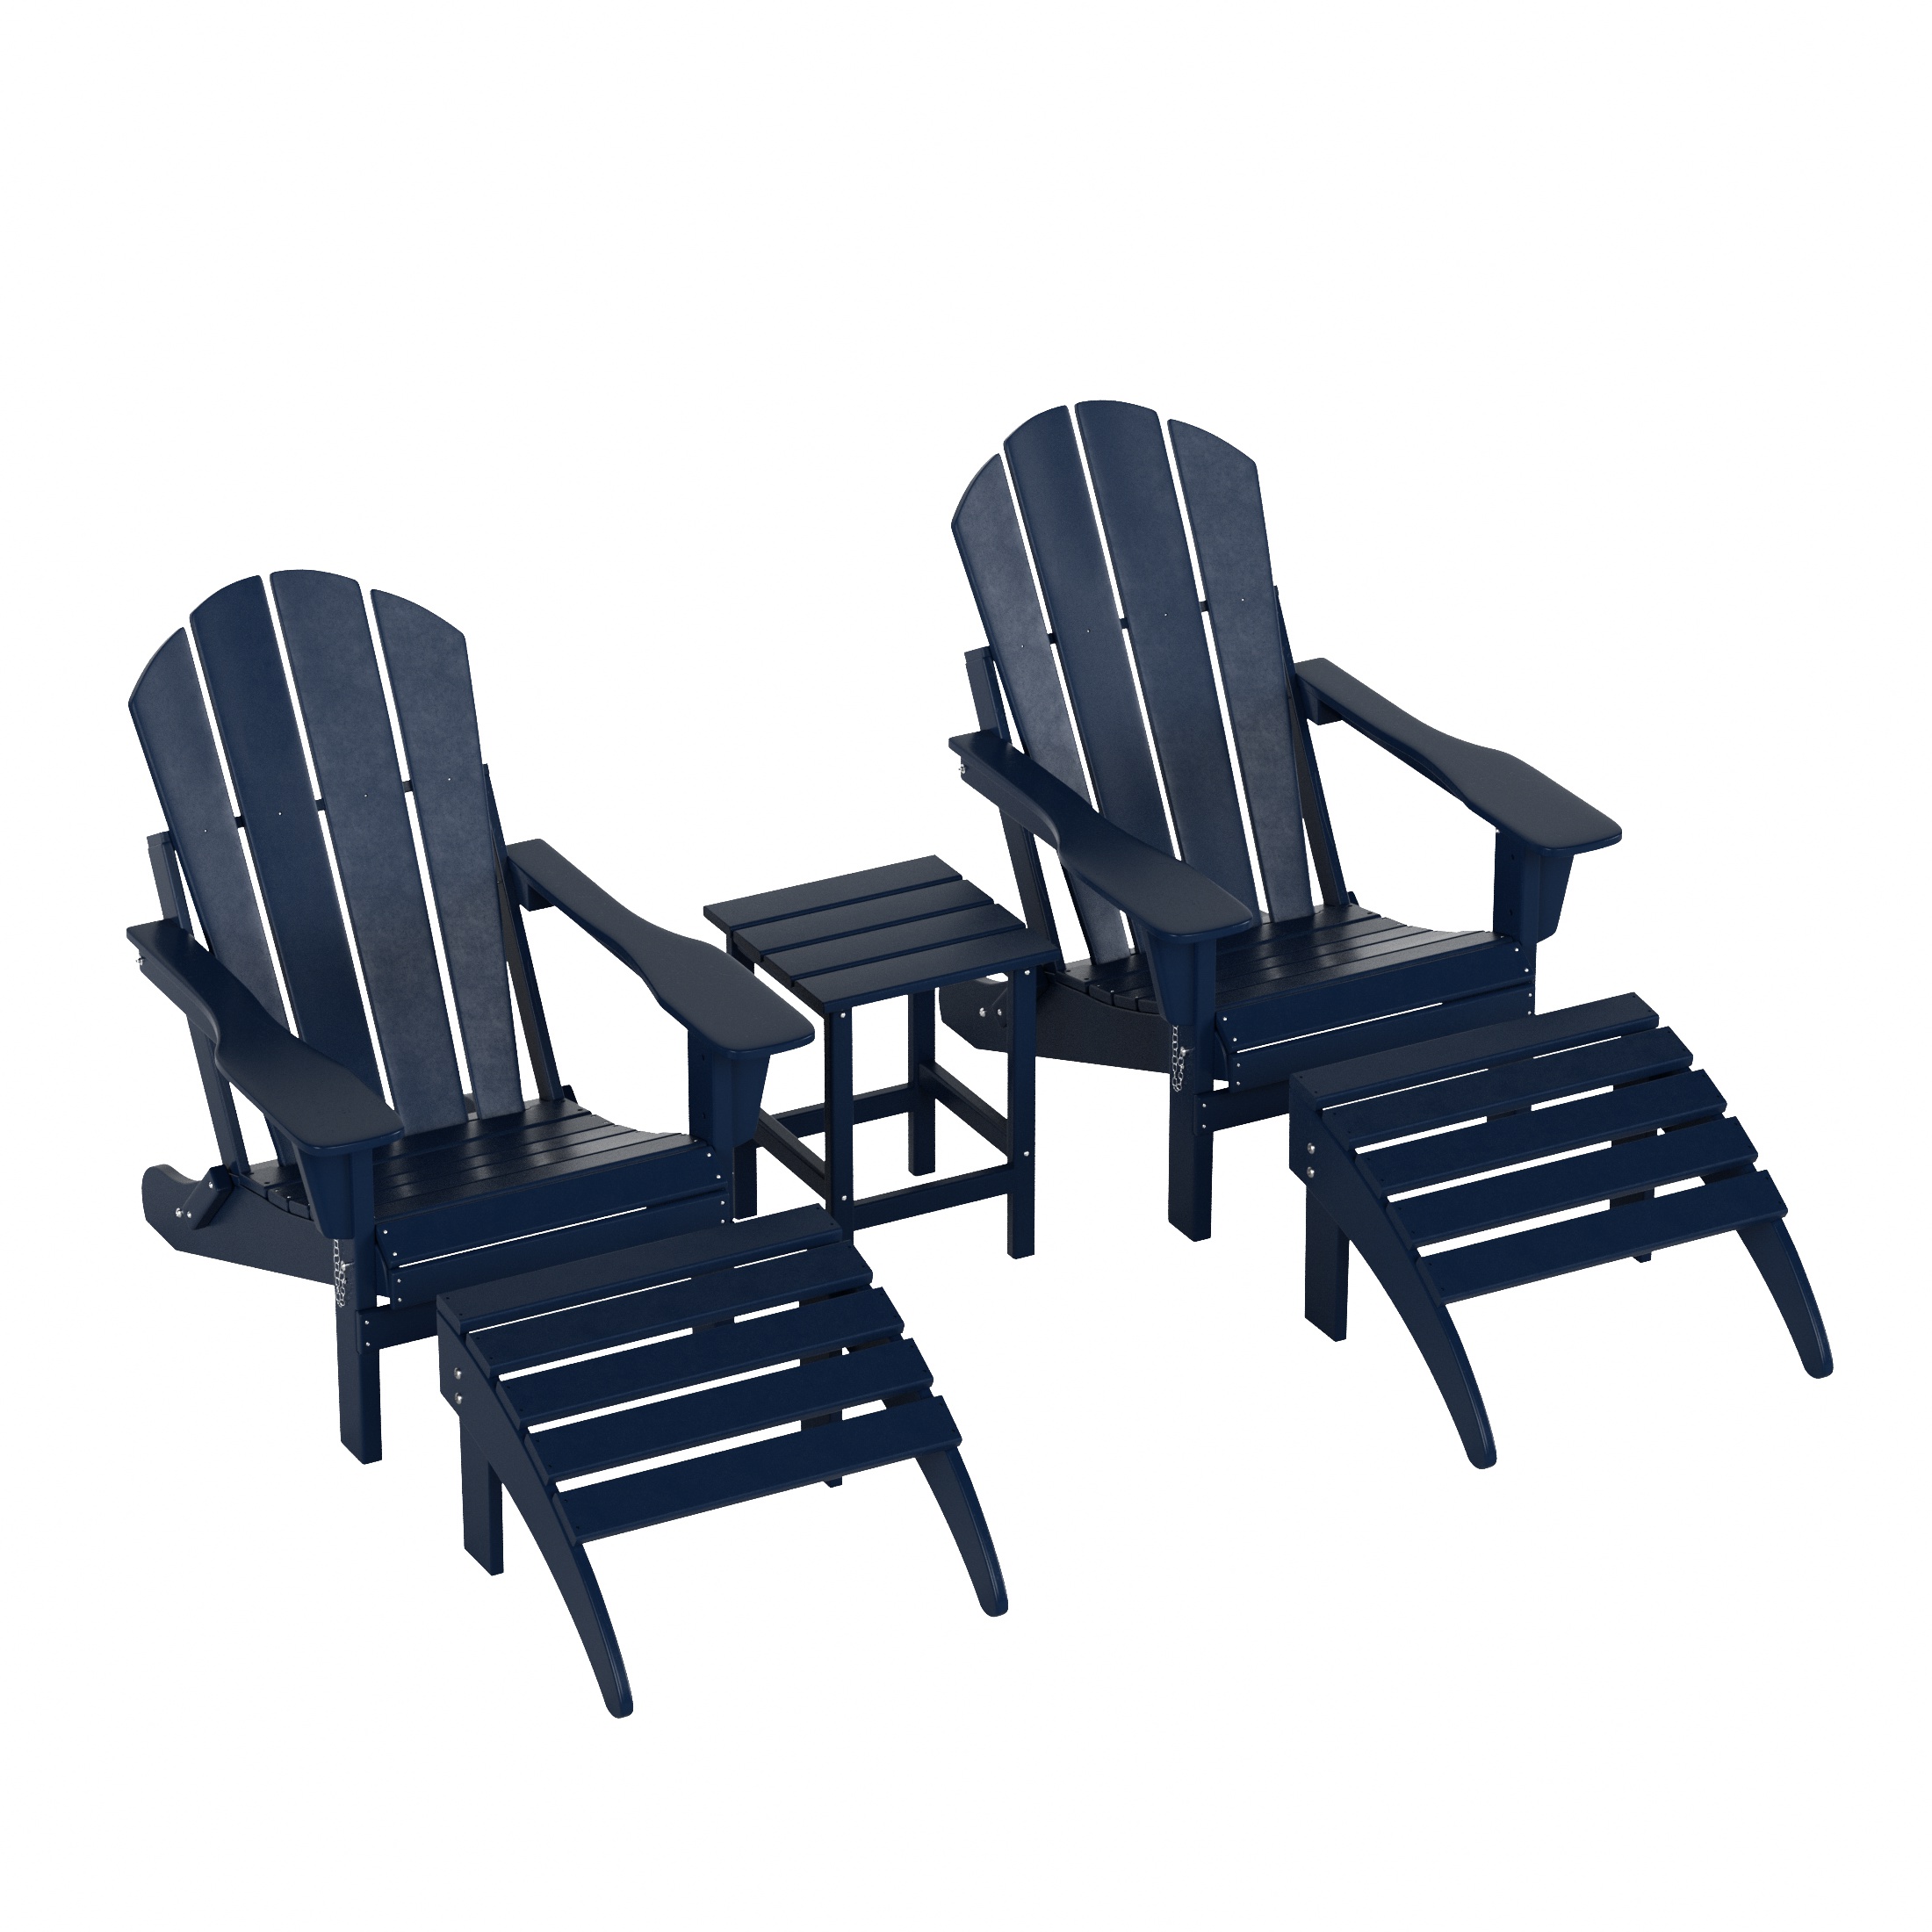 WestinTrends Malibu Outdoor Lounge Chairs Set, 5-Pieces Adirondack Chair Set of 2 with Ottoman and Side Table, All Weather Poly Lumber Patio Lawn Folding Chair for Outside, Navy Blue - image 1 of 7